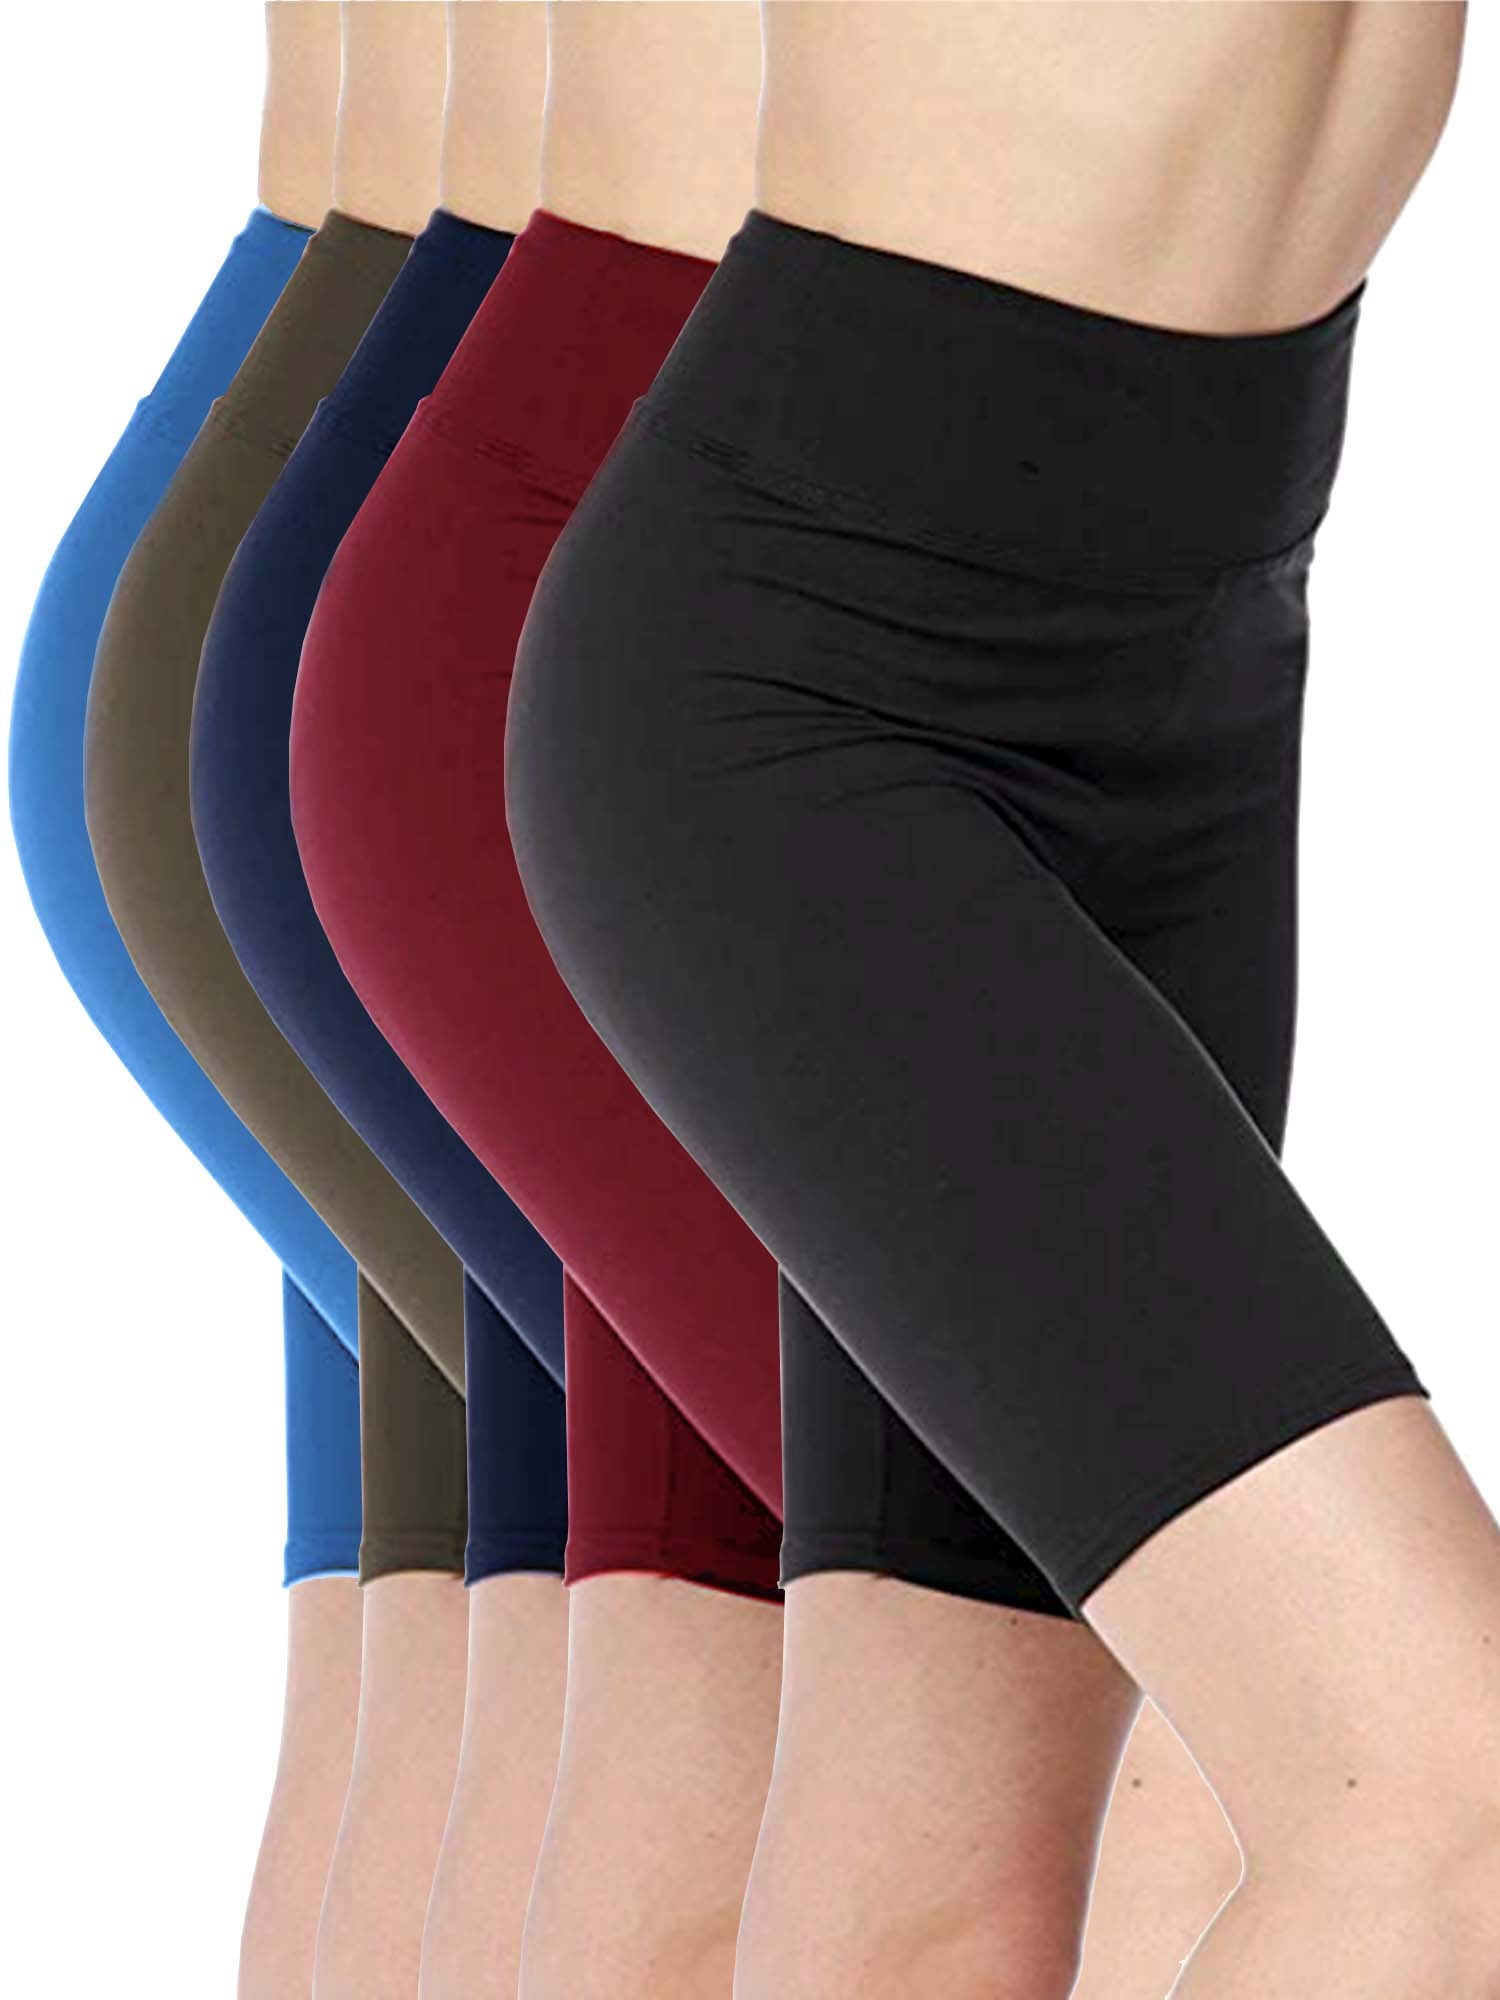 Ladies Cycle Cotton Stretchy Lycra Short Active Casual Sports Women's Leggings 